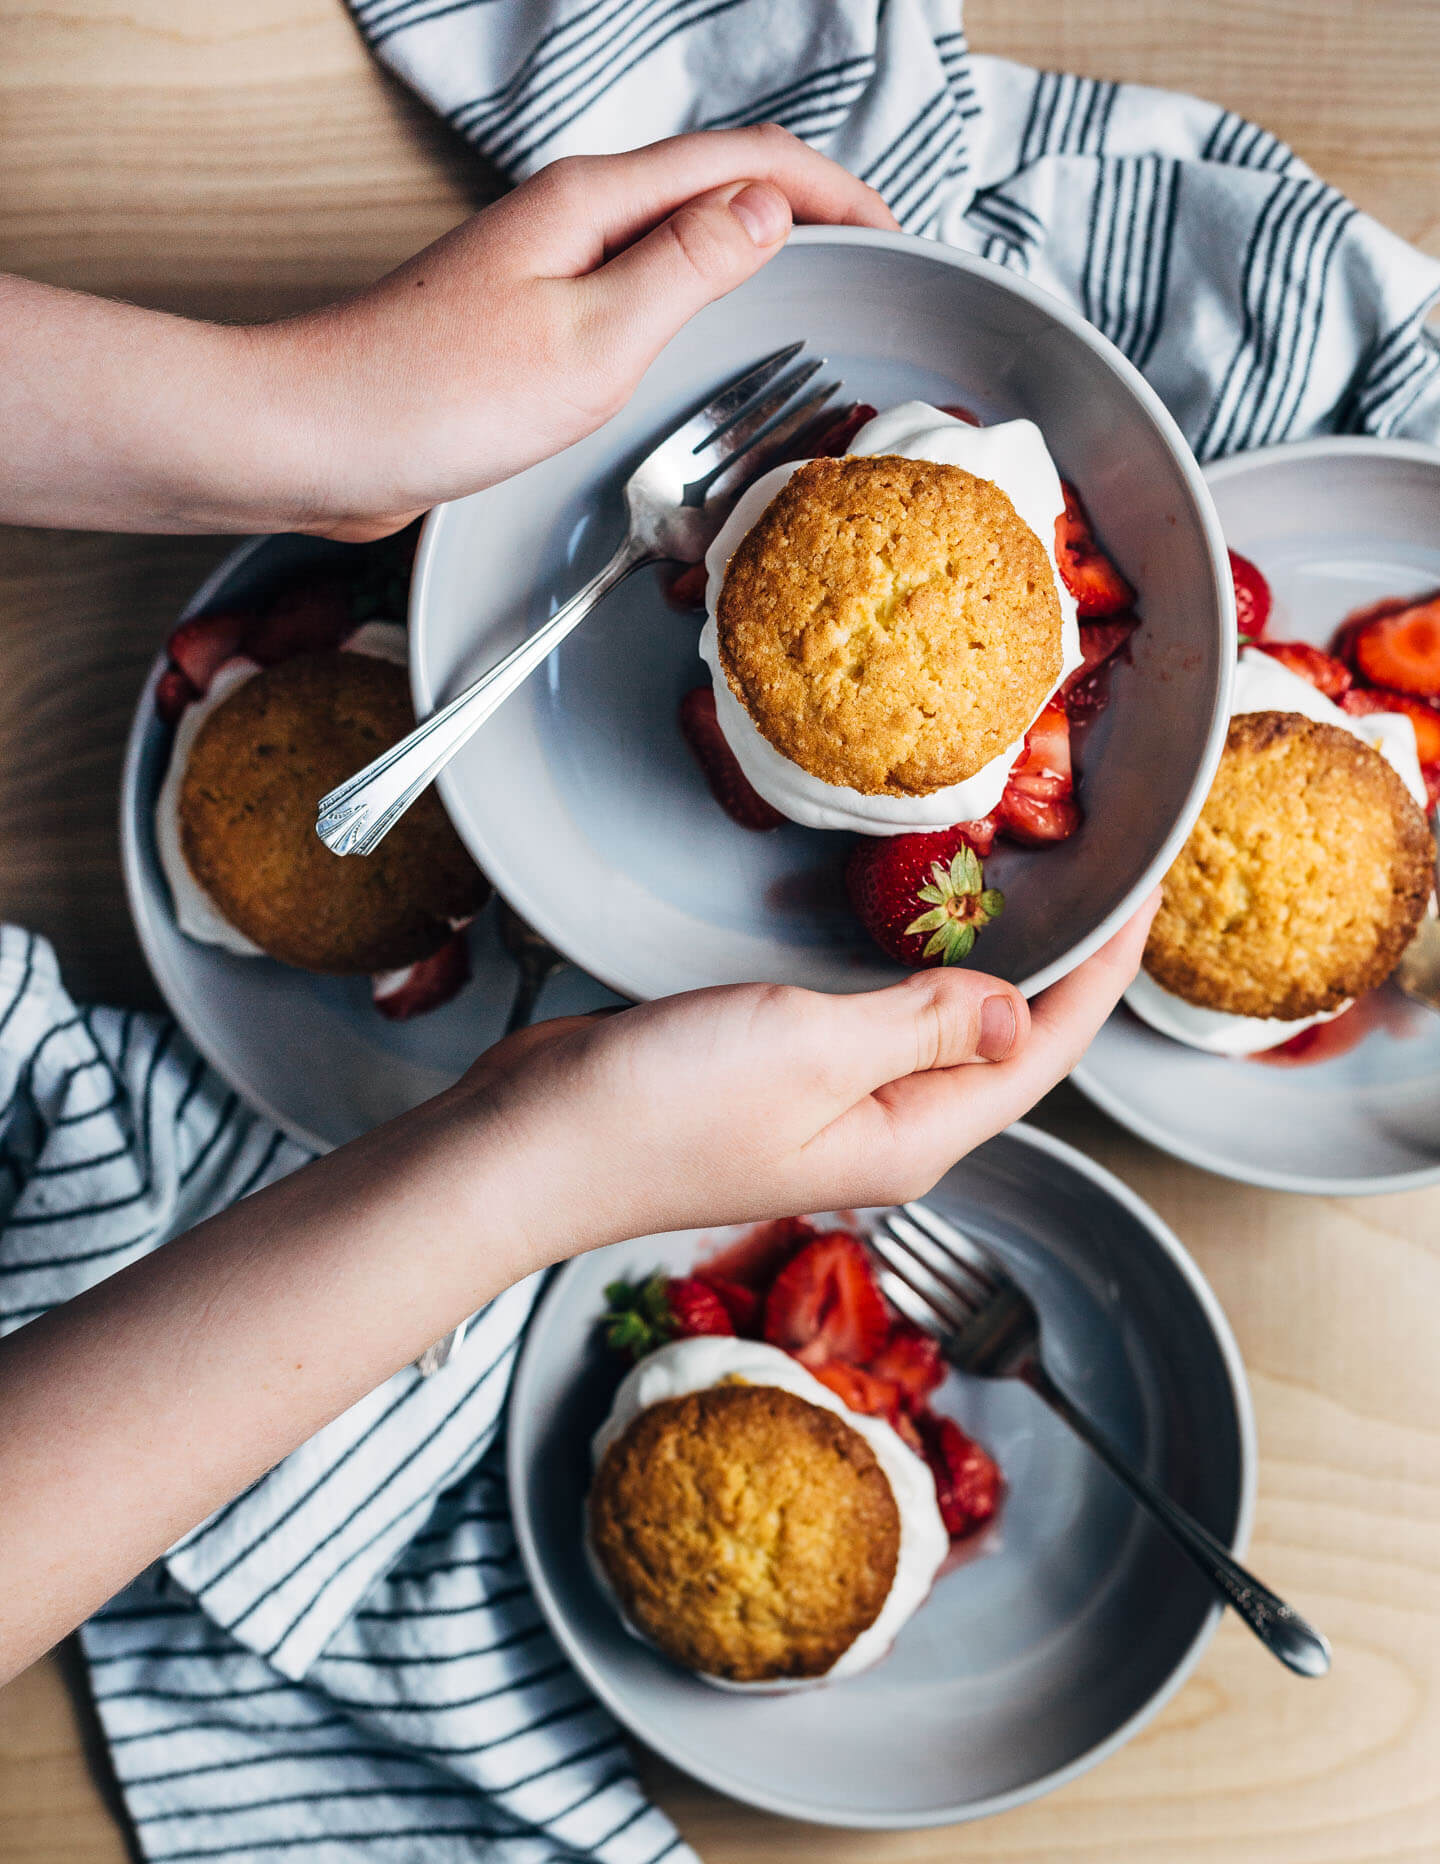 Welcome summer with semolina strawberry shortcakes. This spin on the quintessential early summer dessert features toothsome semolina-lemon shortcakes, pillowy whipped cream, and perfectly ripe local strawberries.